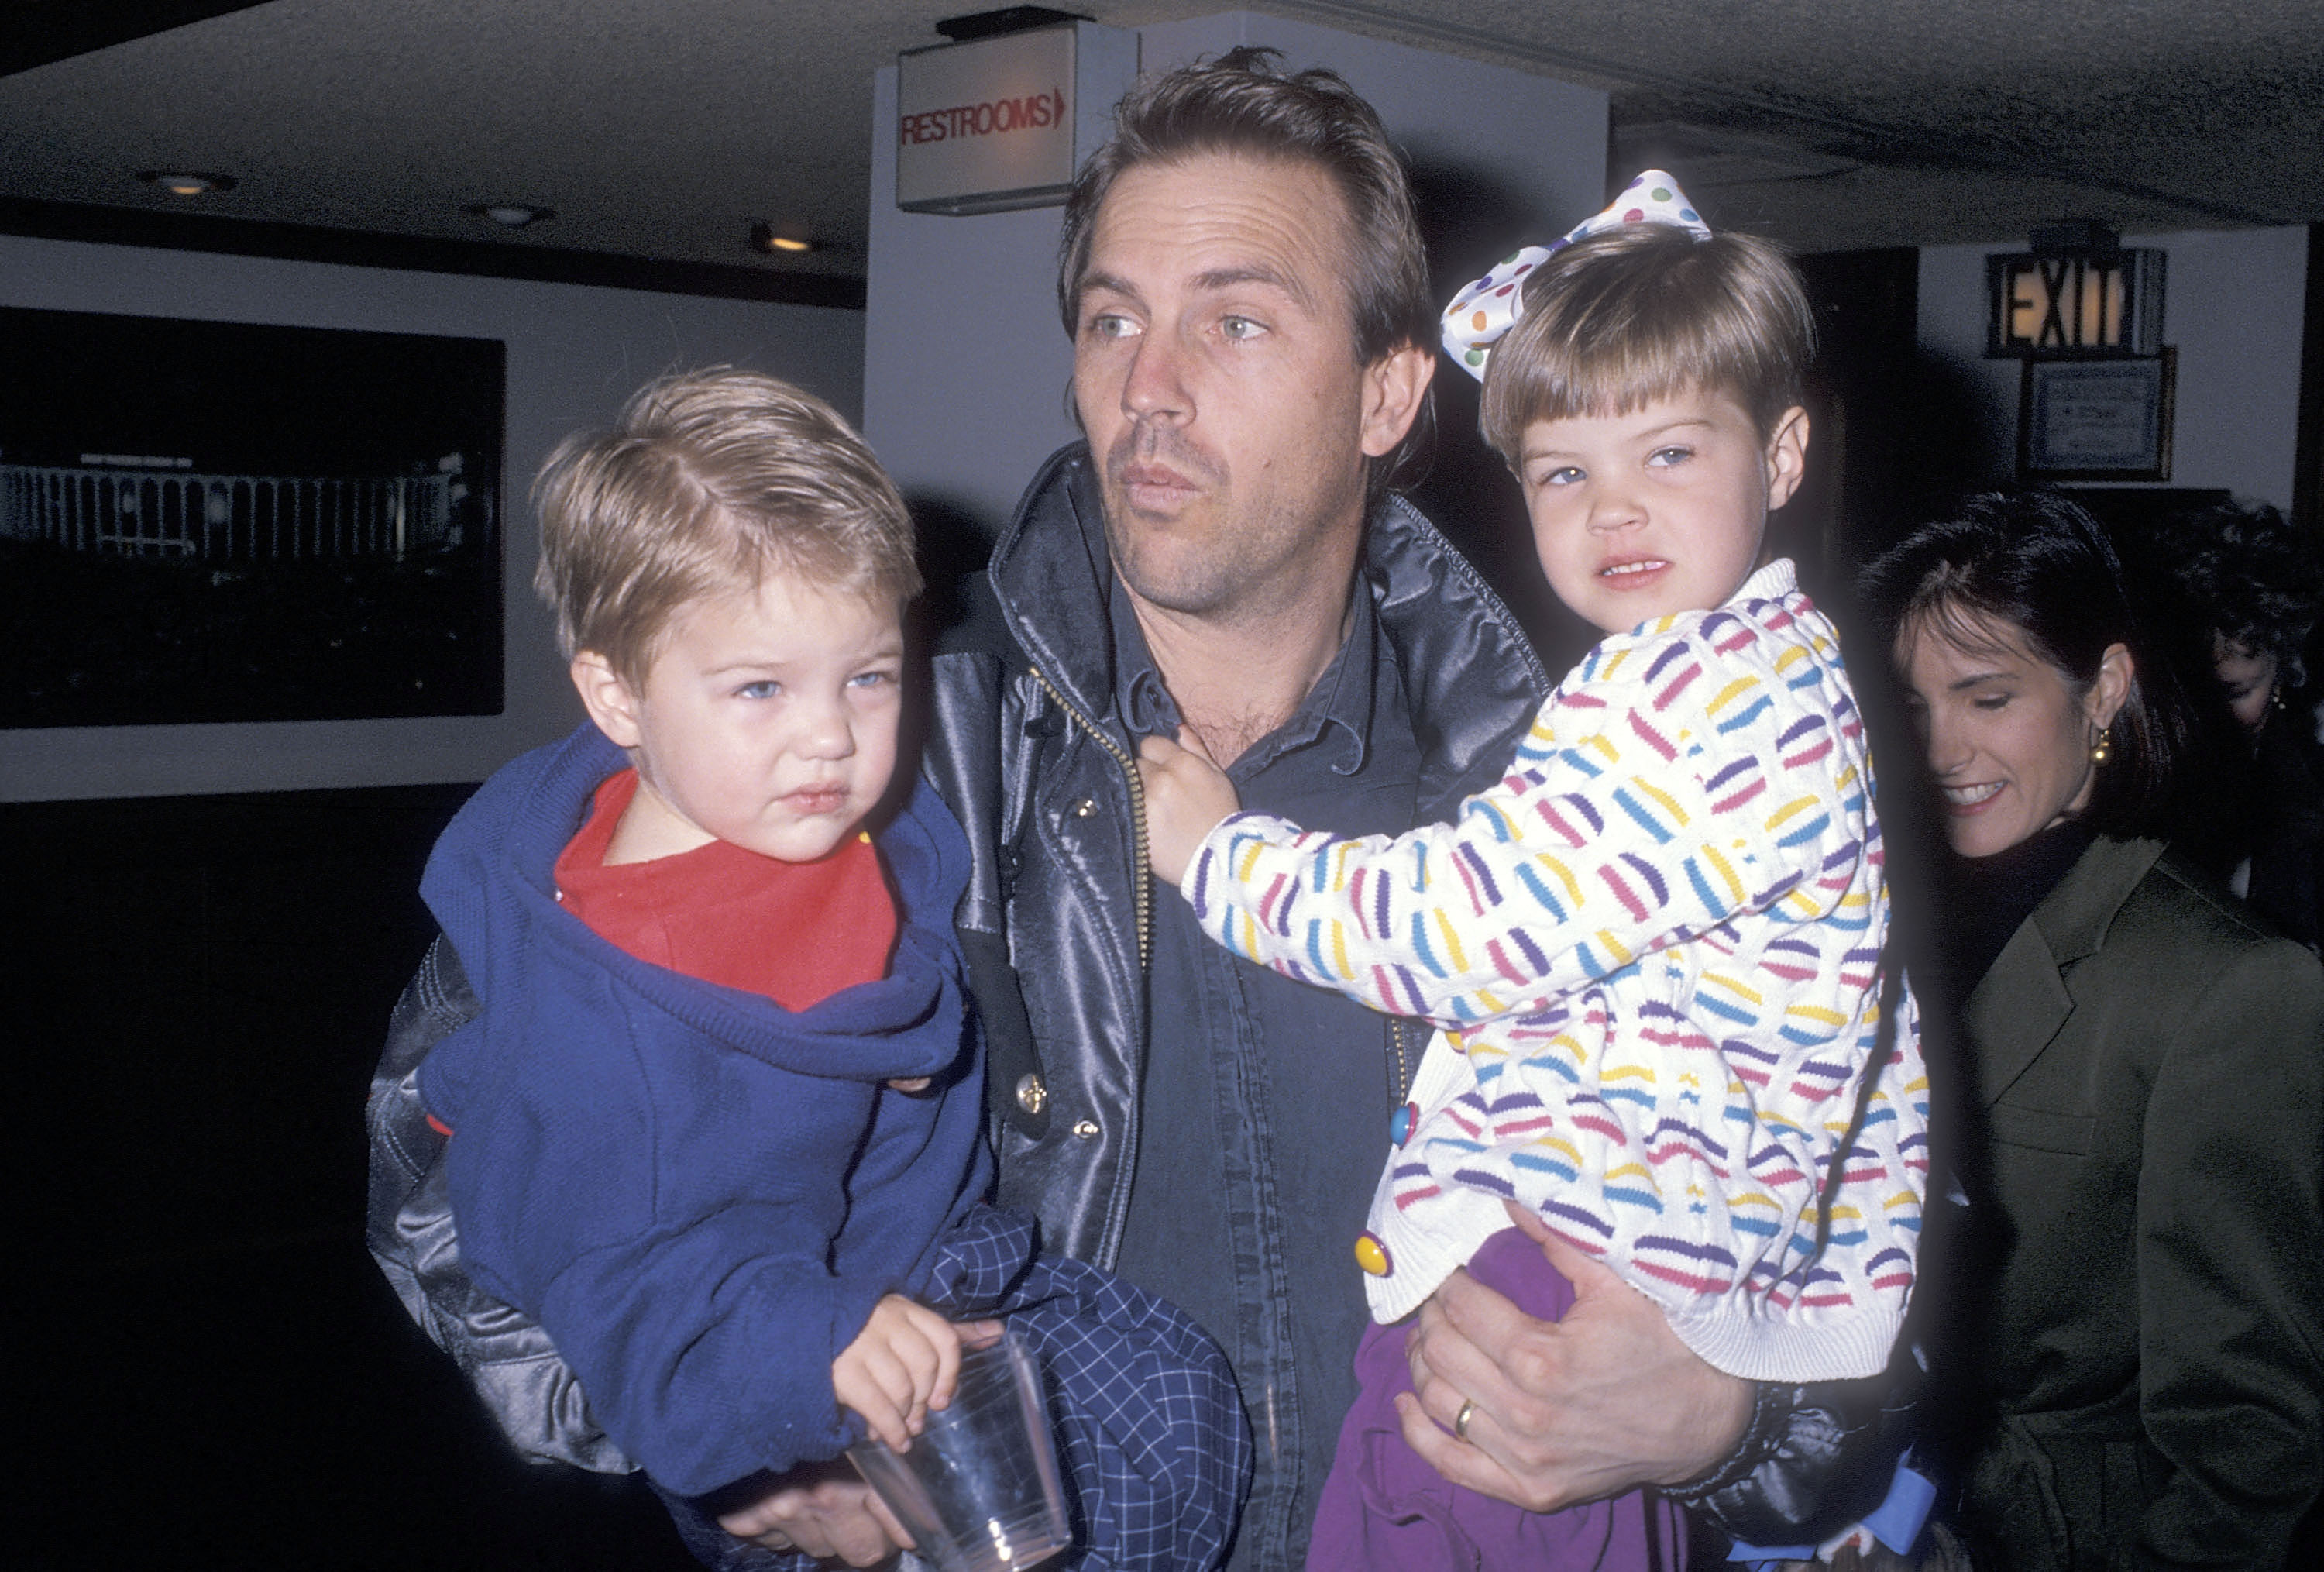 Kevin Costner, son Joe Costner, and daughter Lily Costner at the Moscow Circus opening night performance on March 14, 1990 at the Great Western Forum in Inglewood, California | Source: Getty Images